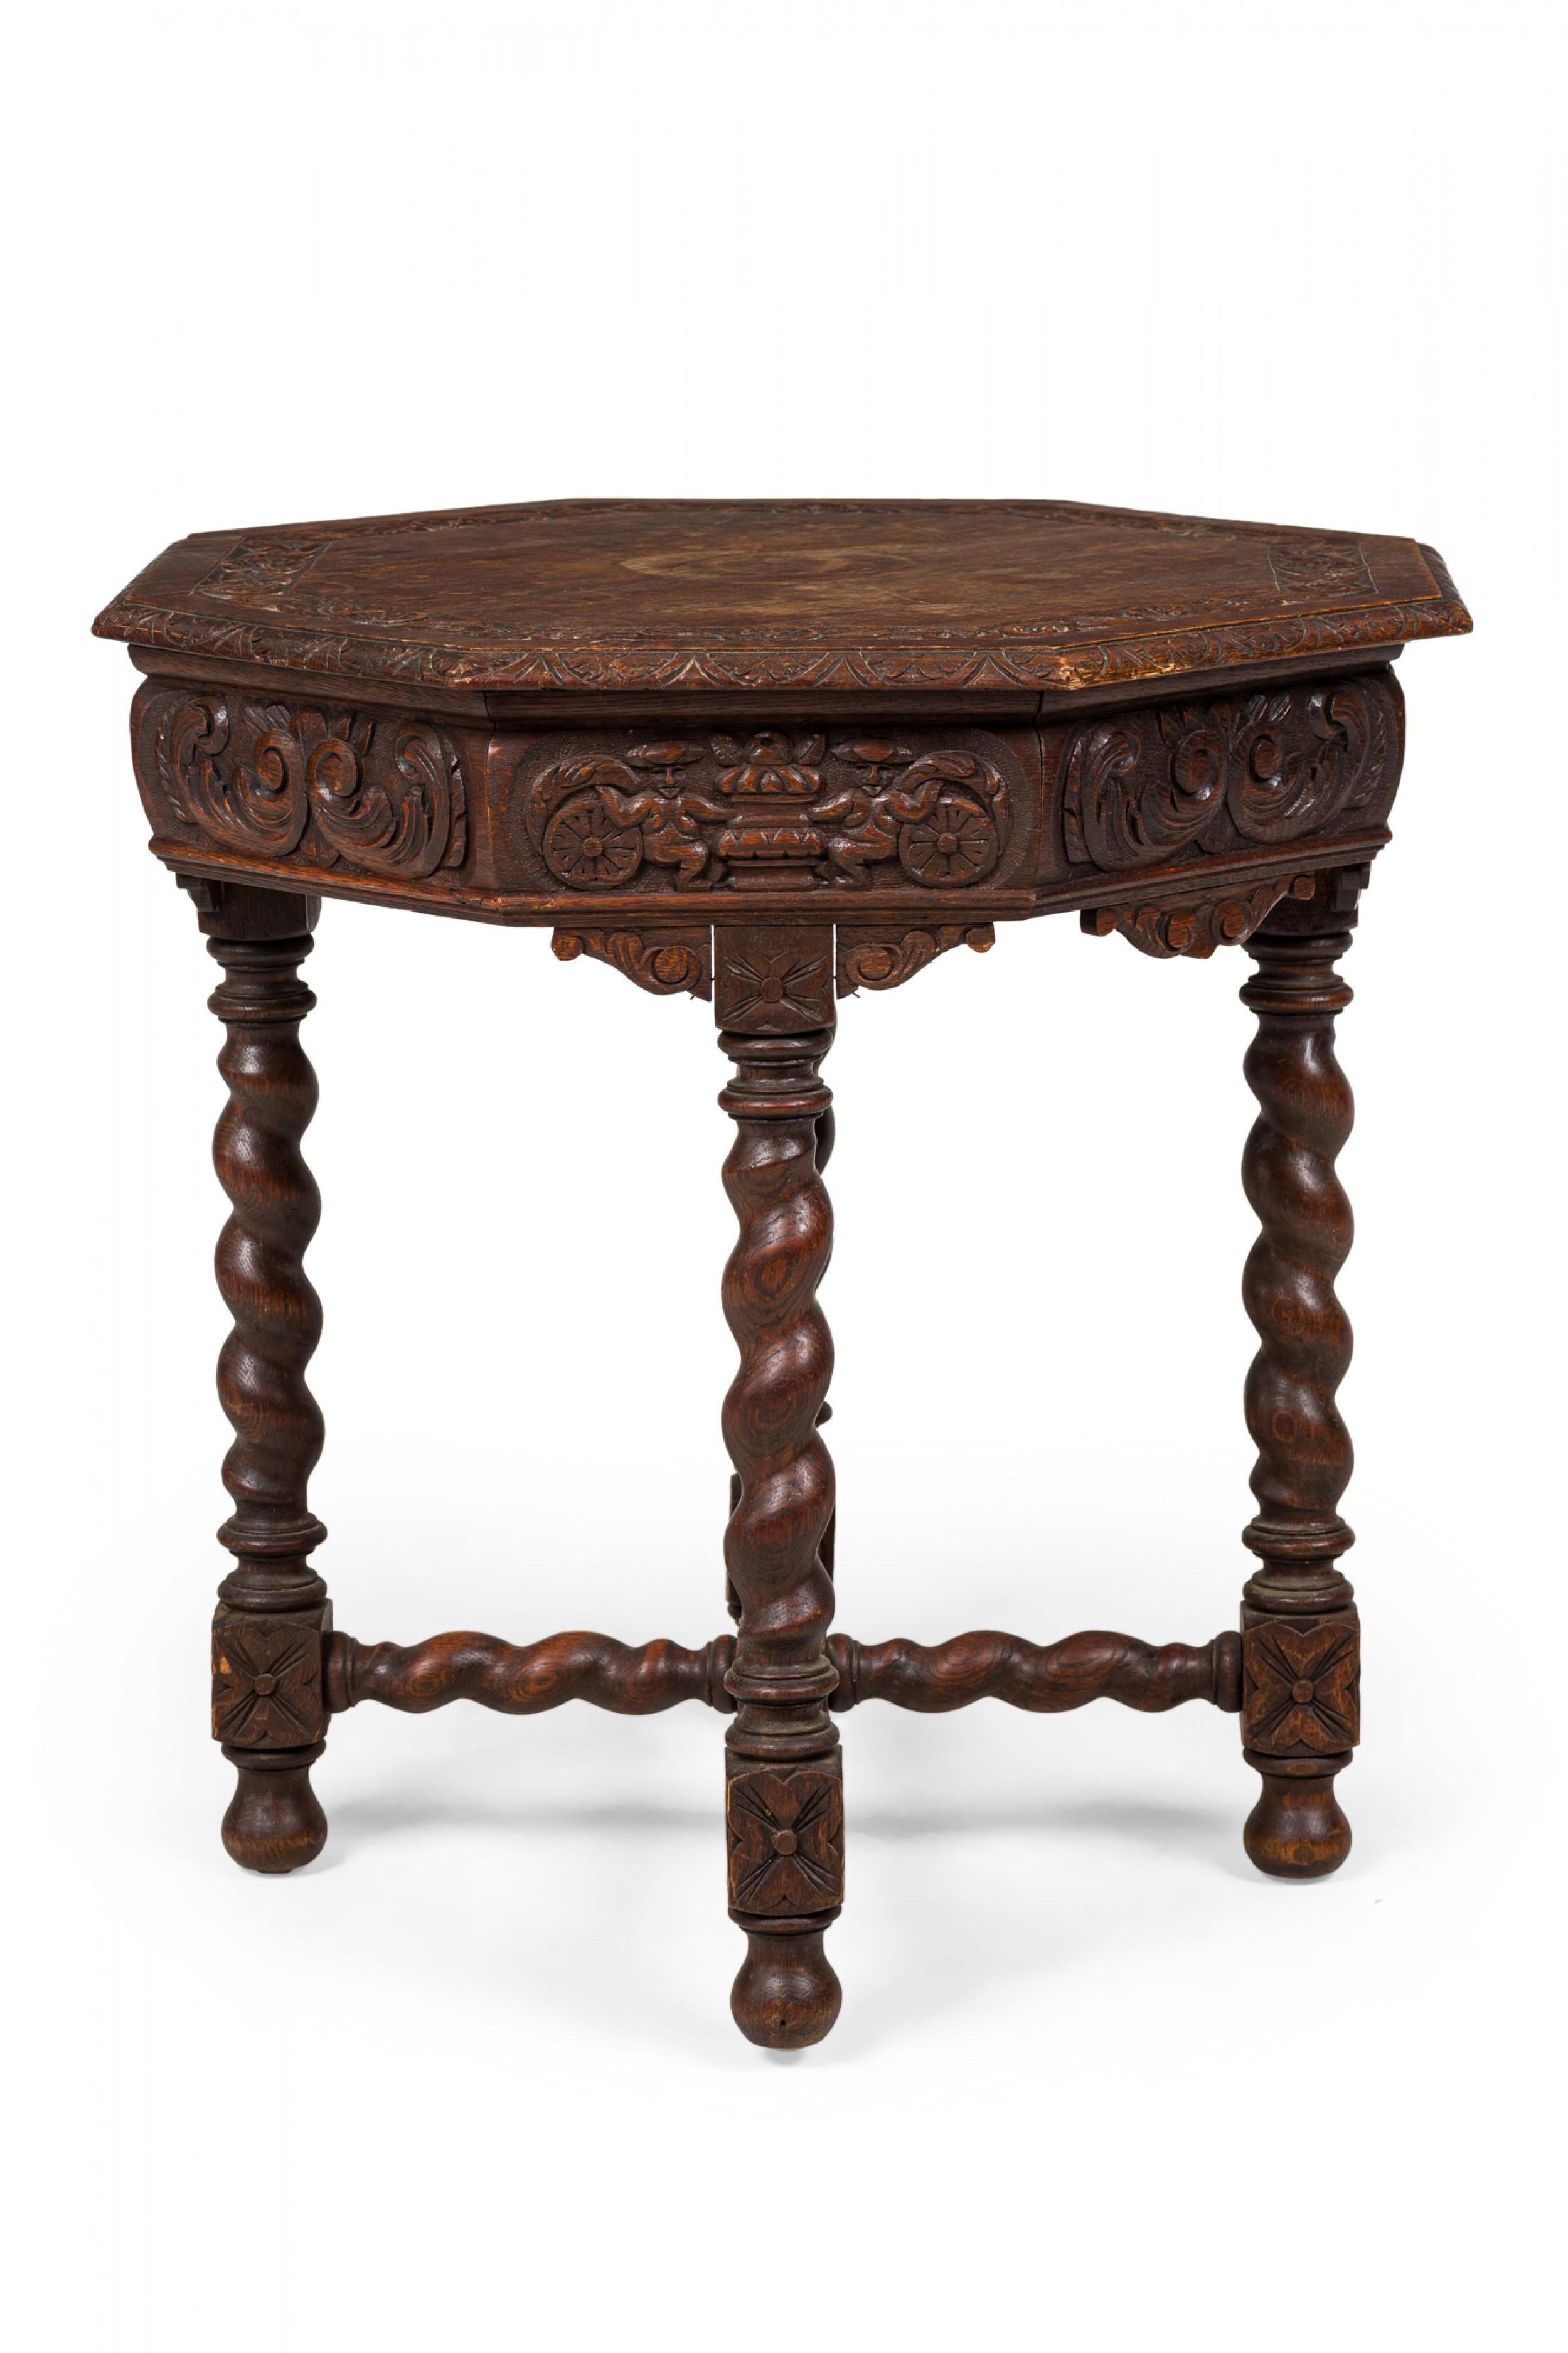 Oak English Jacobean-Style Carved Spiral Turned Leg Octagonal Occasional/Side Table For Sale